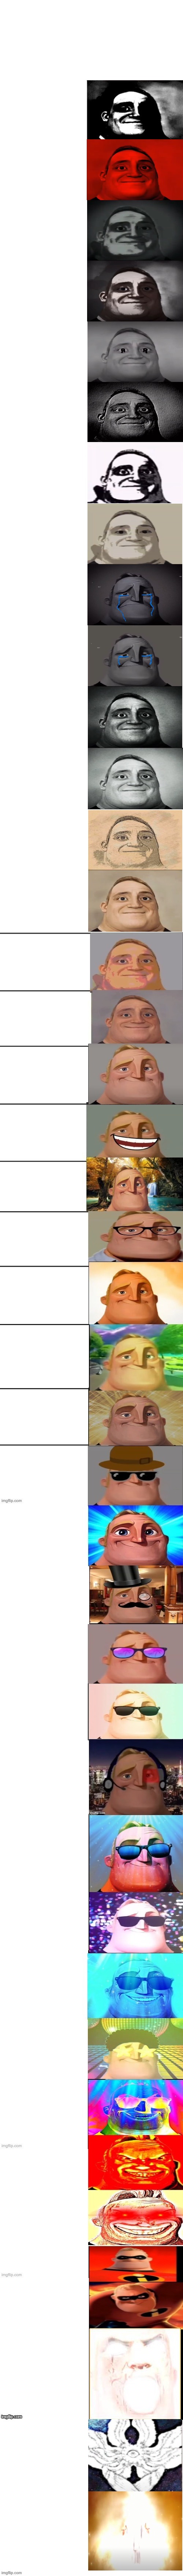 Mr Incredible Becoming Canny Super Extended Blank Meme Template